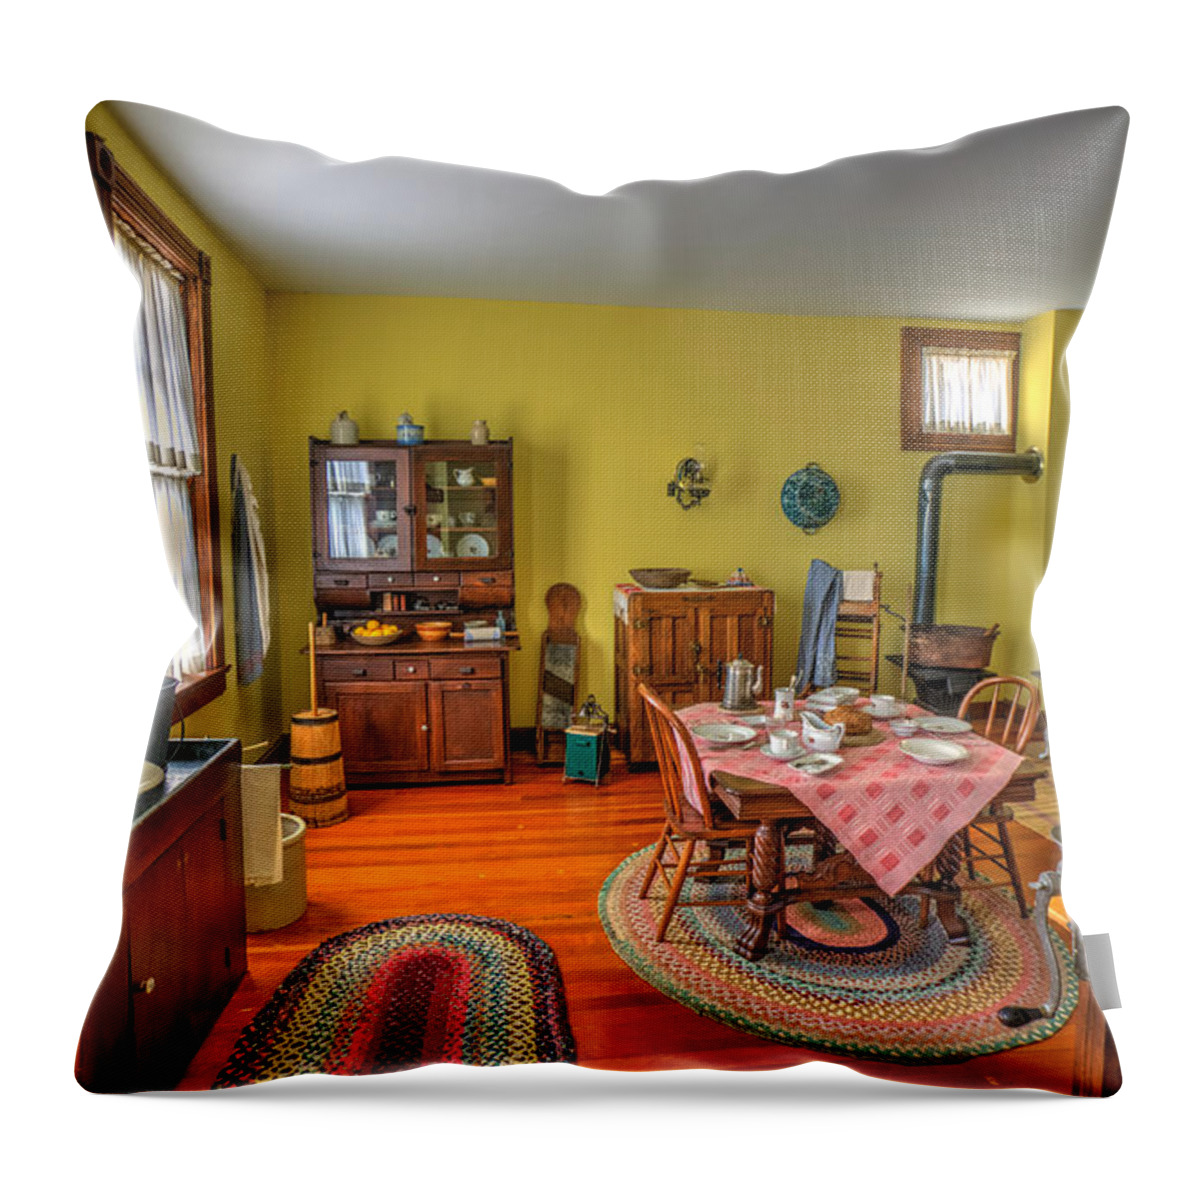 Hinckley Throw Pillow featuring the photograph Hinckley Fire Museum by Amanda Stadther